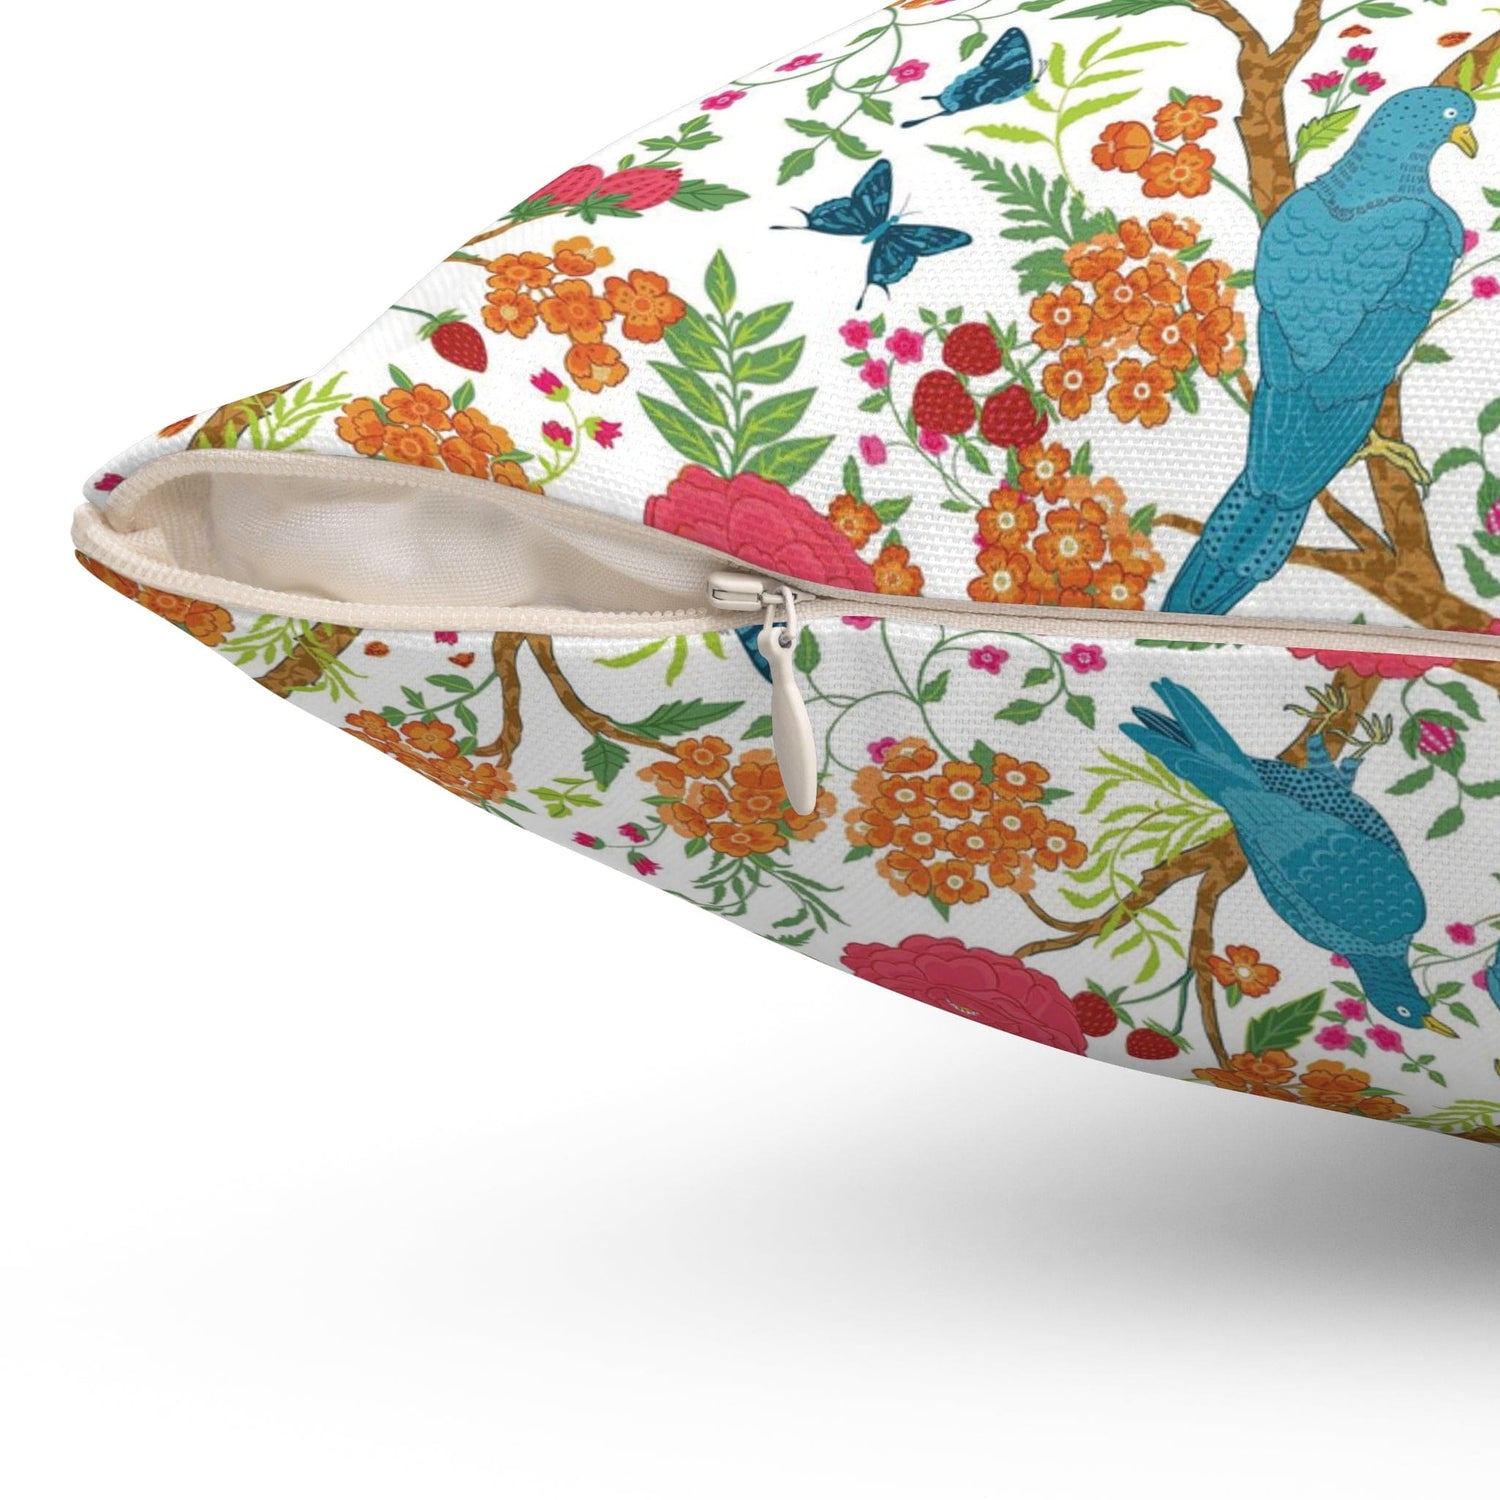 Kate McEnroe New York Chinoiserie Tropical Bird Garden Pillow with Insert, Floral Cushion, Botanical Bird Throw Pillow KM13809924 Throw Pillows